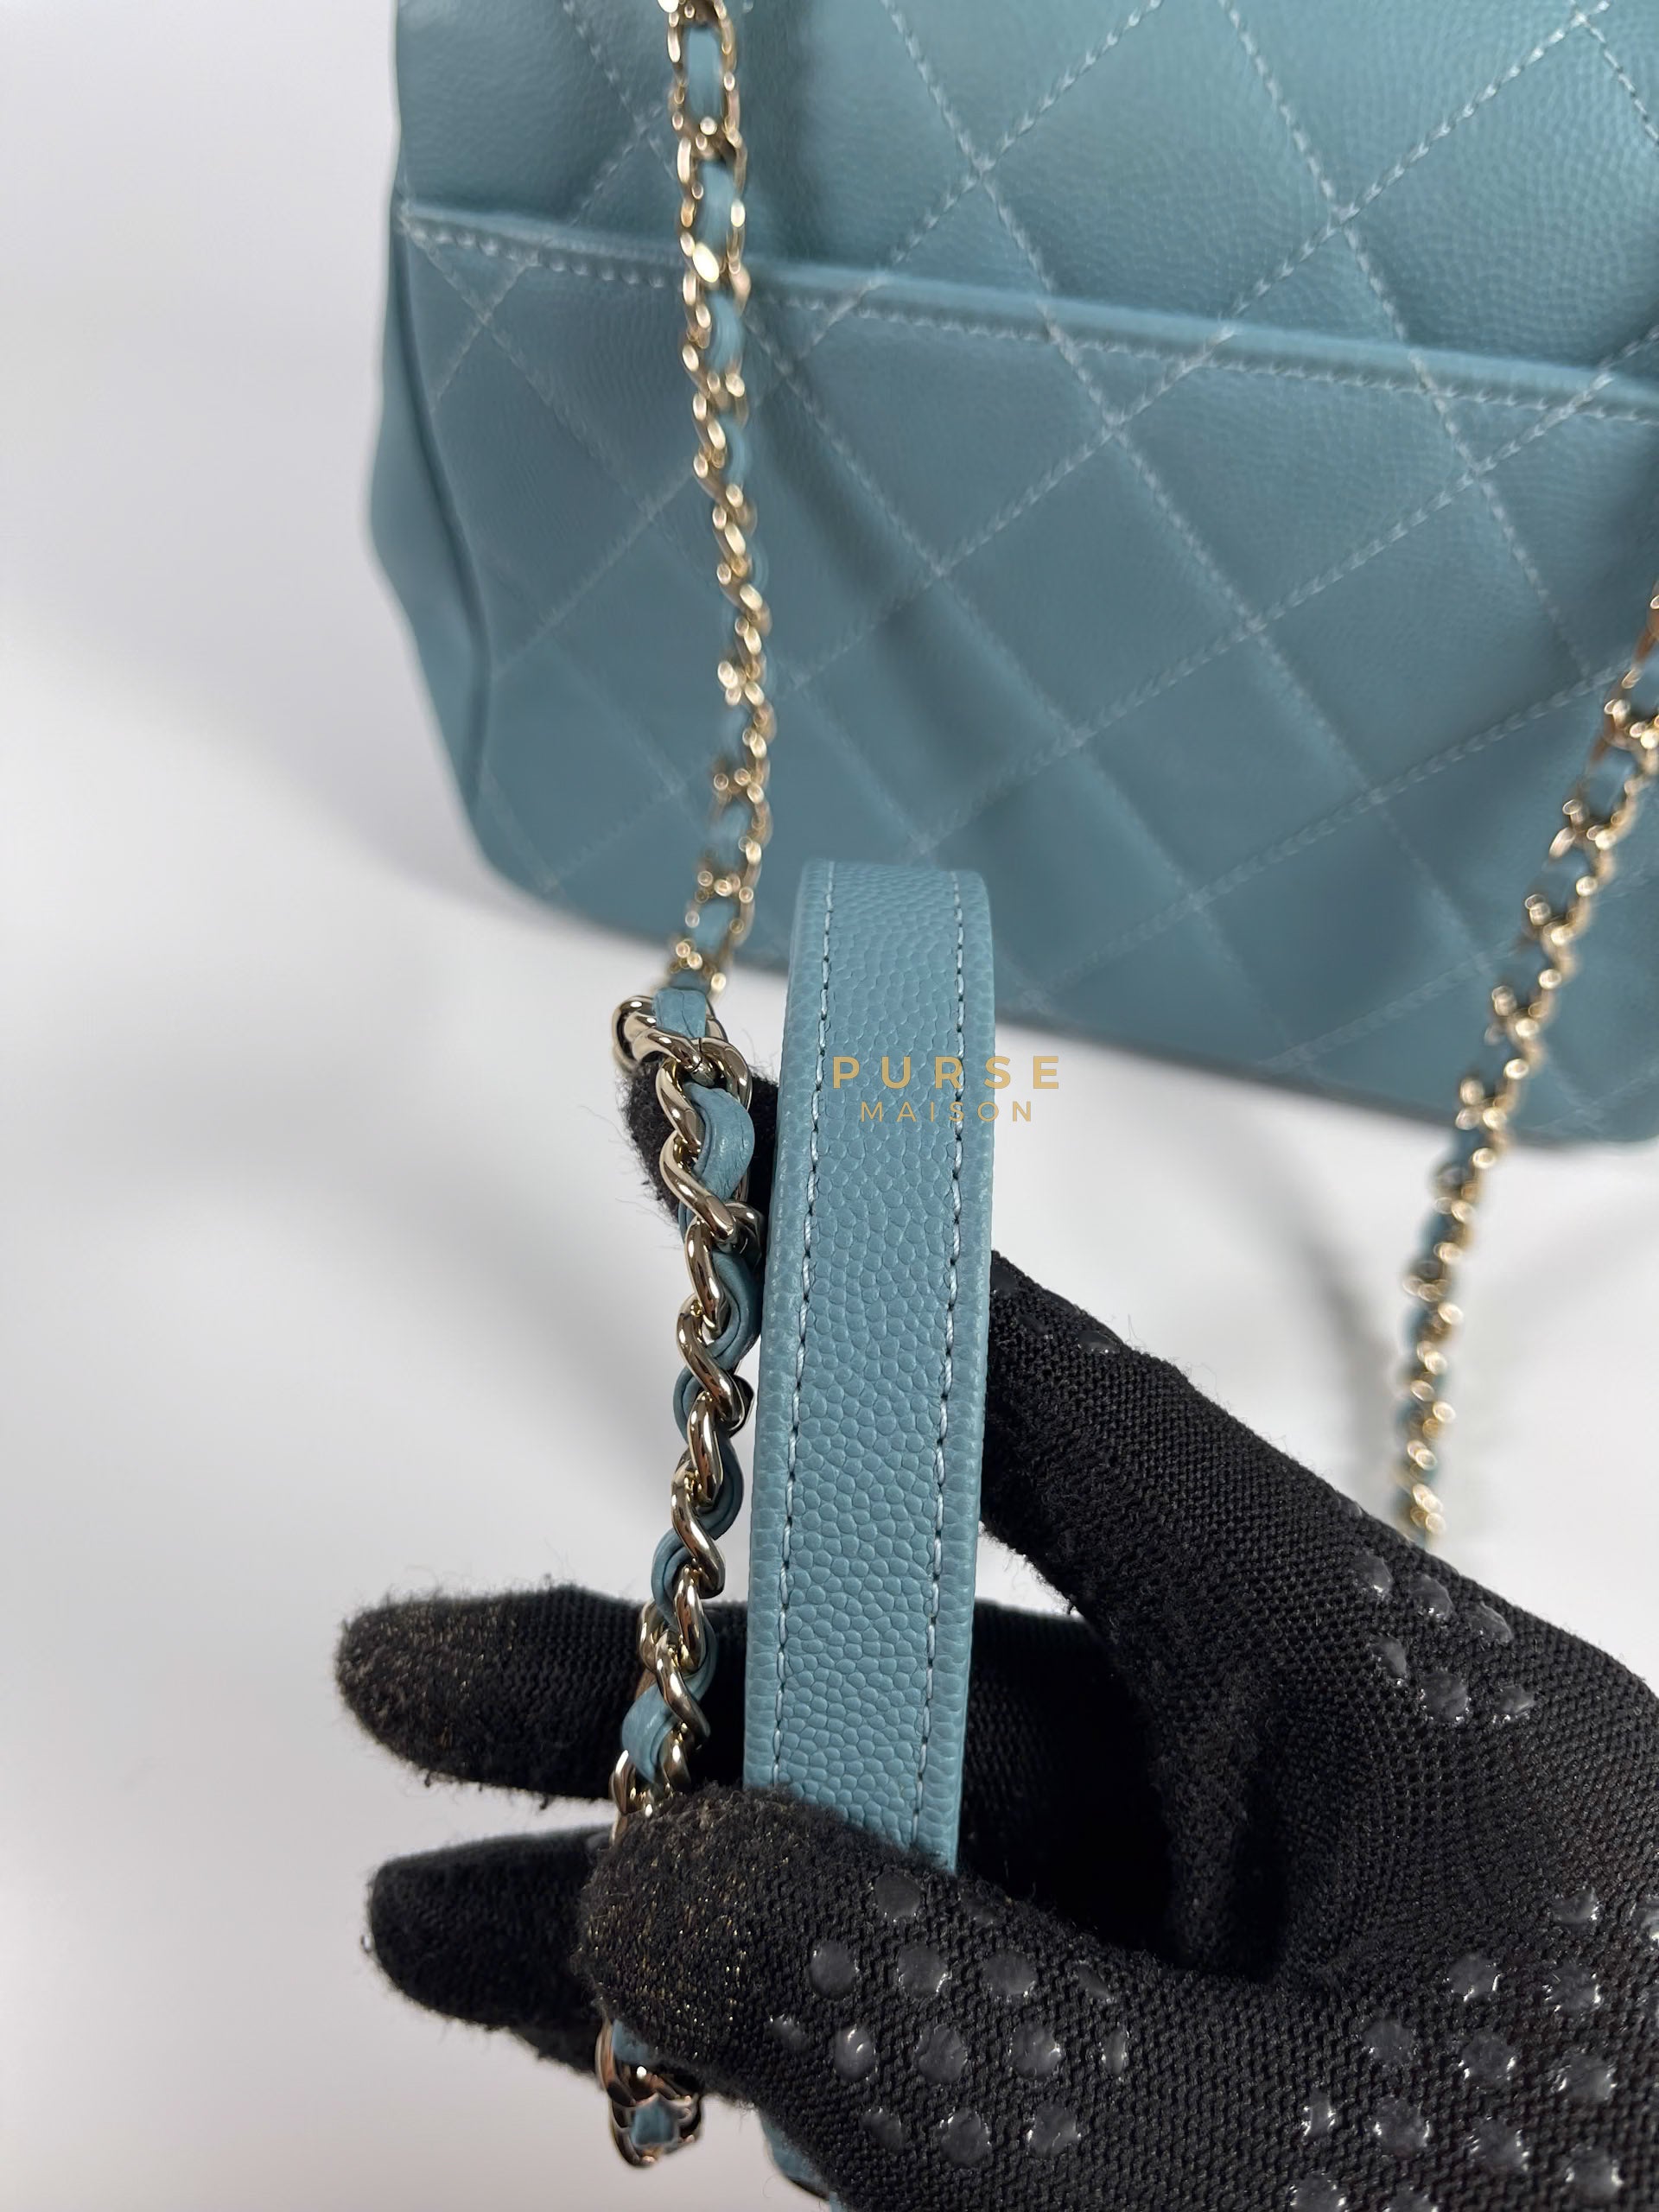 Business Affinity Small Tiffany blue Caviar & Light Gold Hardware Series 29 | Purse Maison Luxury Bags Shop